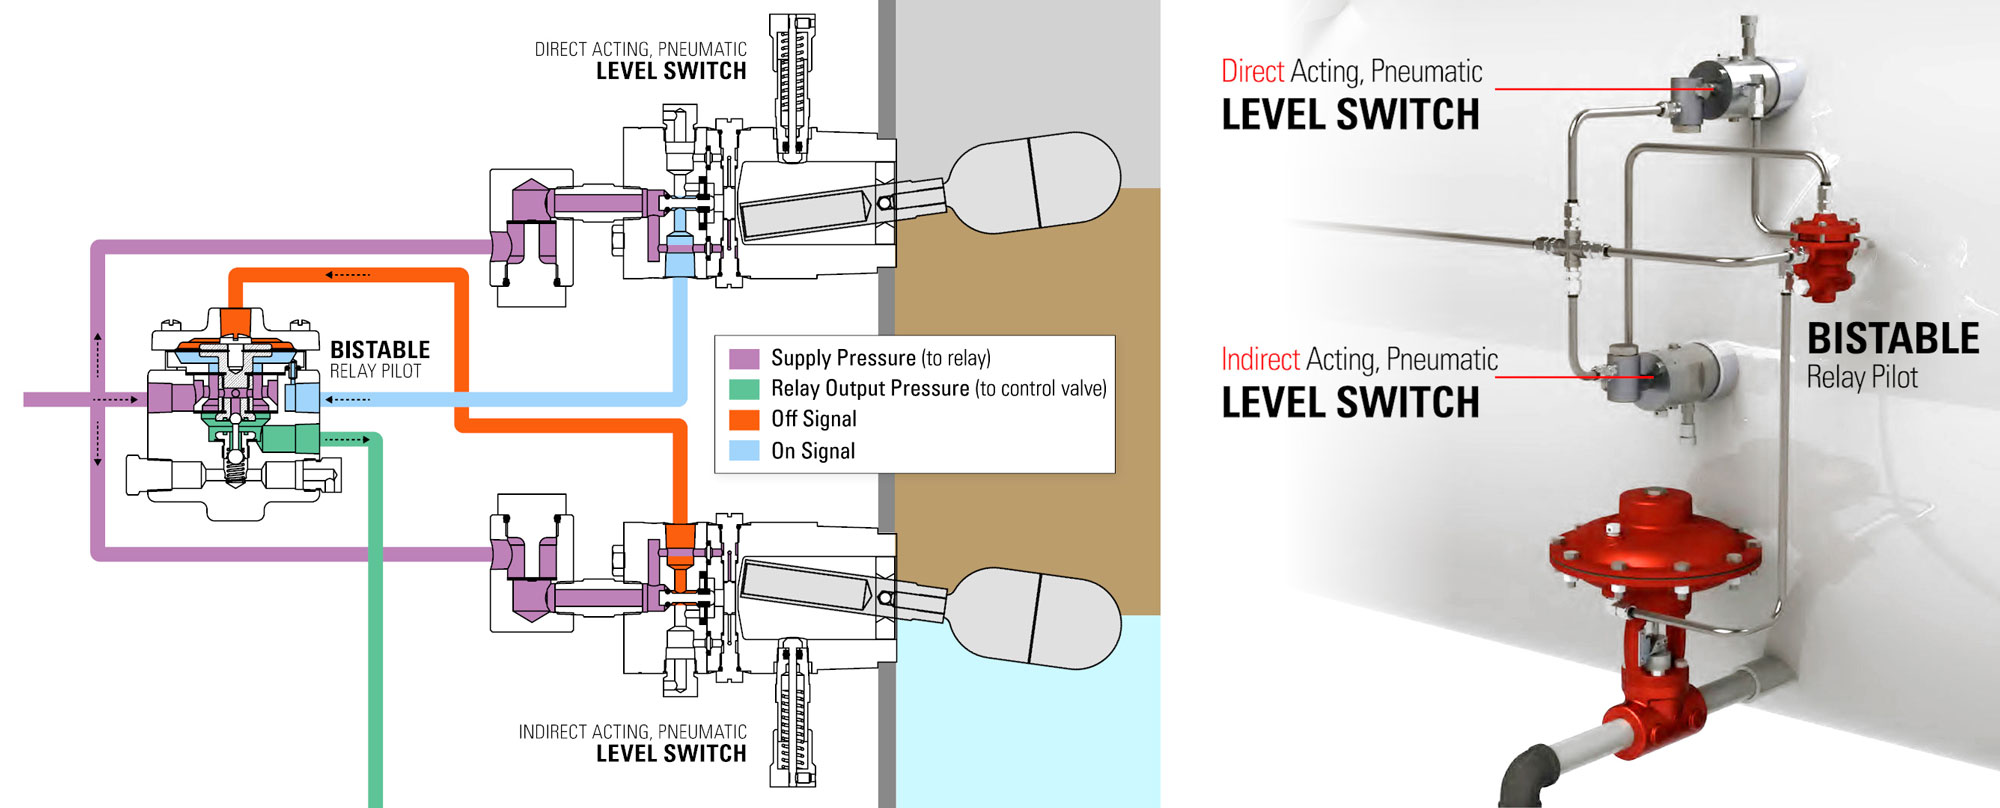 liquid gap control with bistable relay pilot